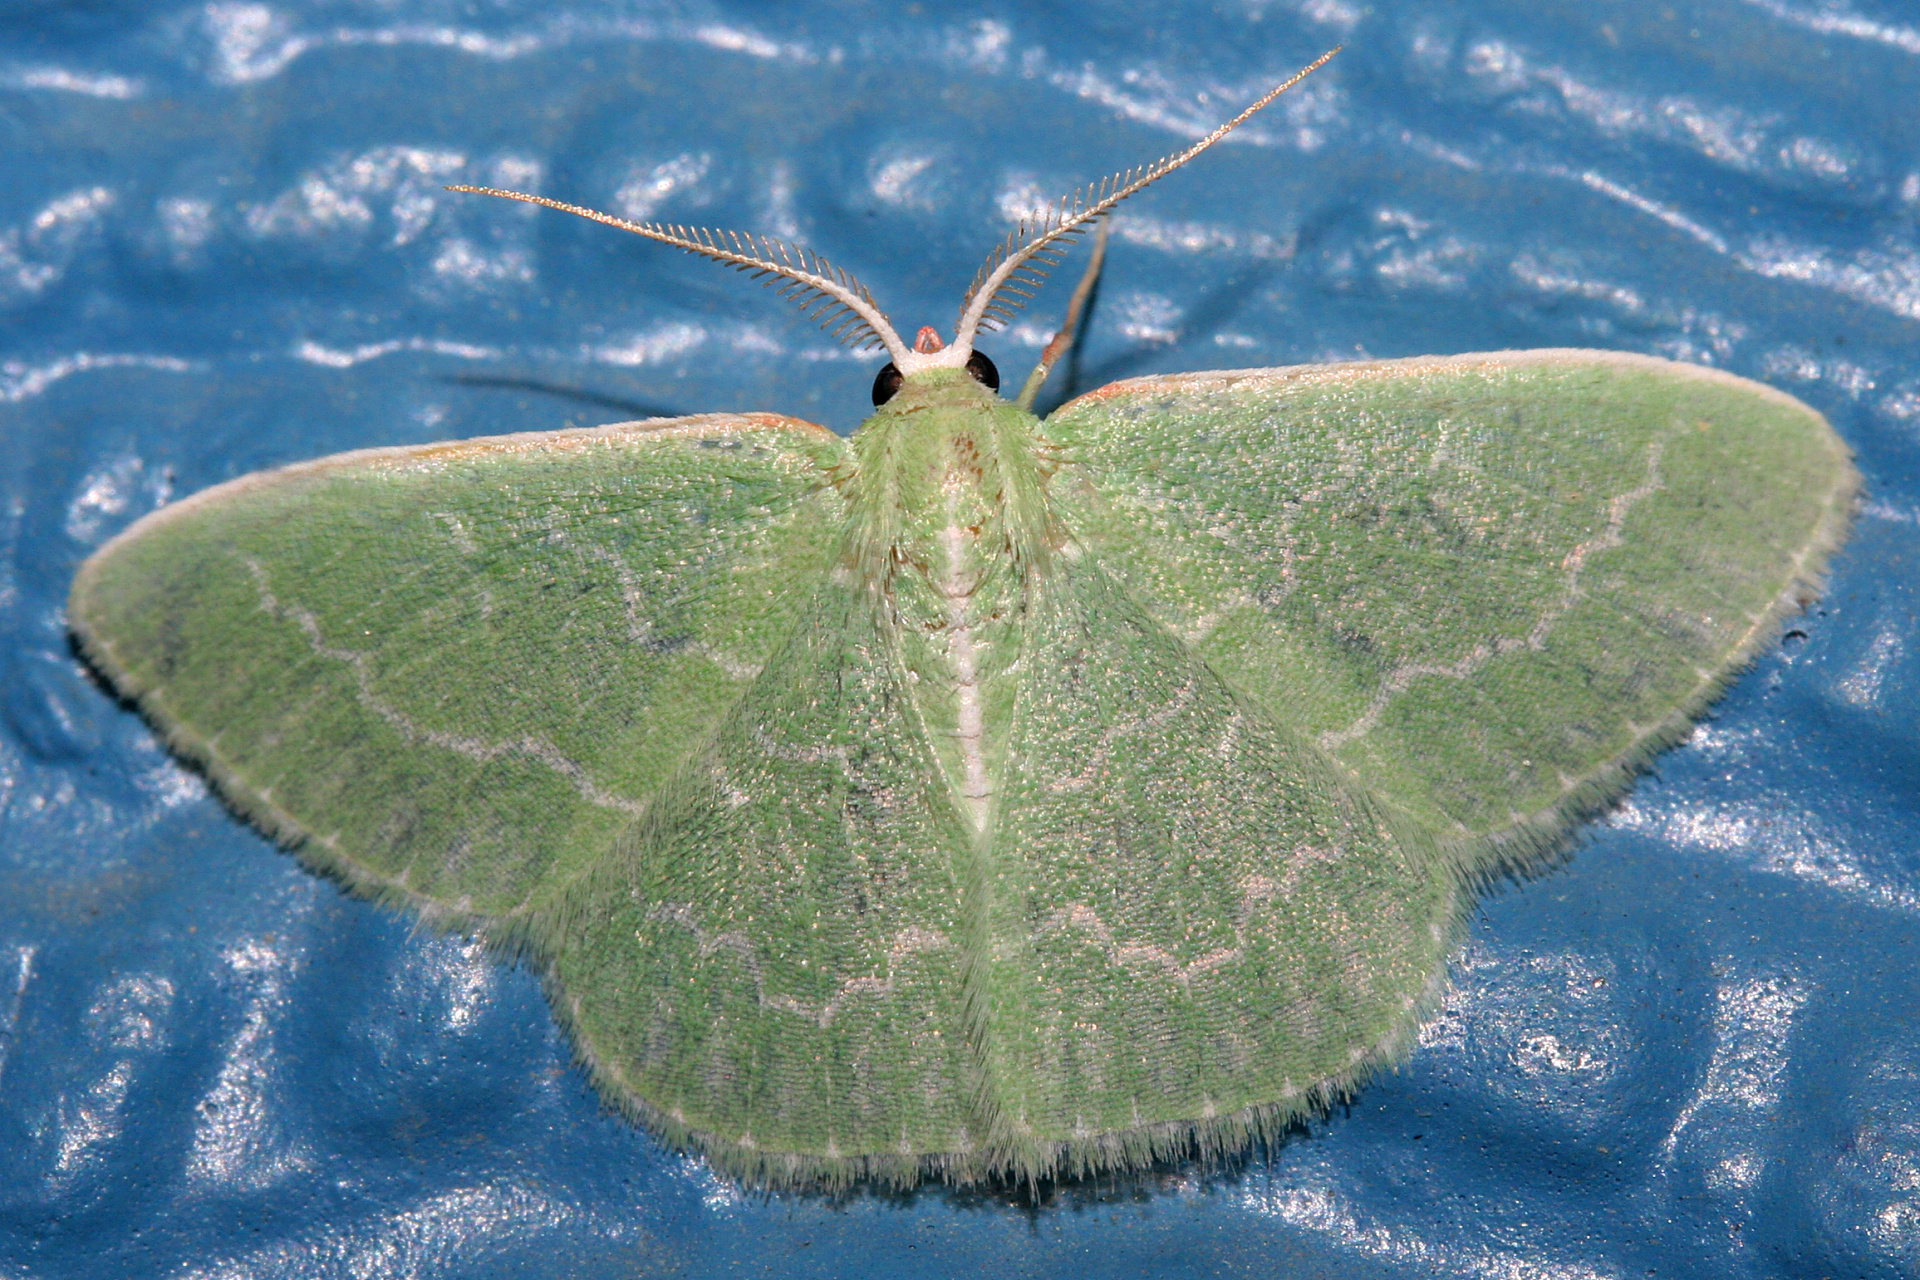 Synchlora aerata (Travels » US Trip 2: Cheyenne Epic » Animals » Insects » Butterfies and Moths » Geometridae)